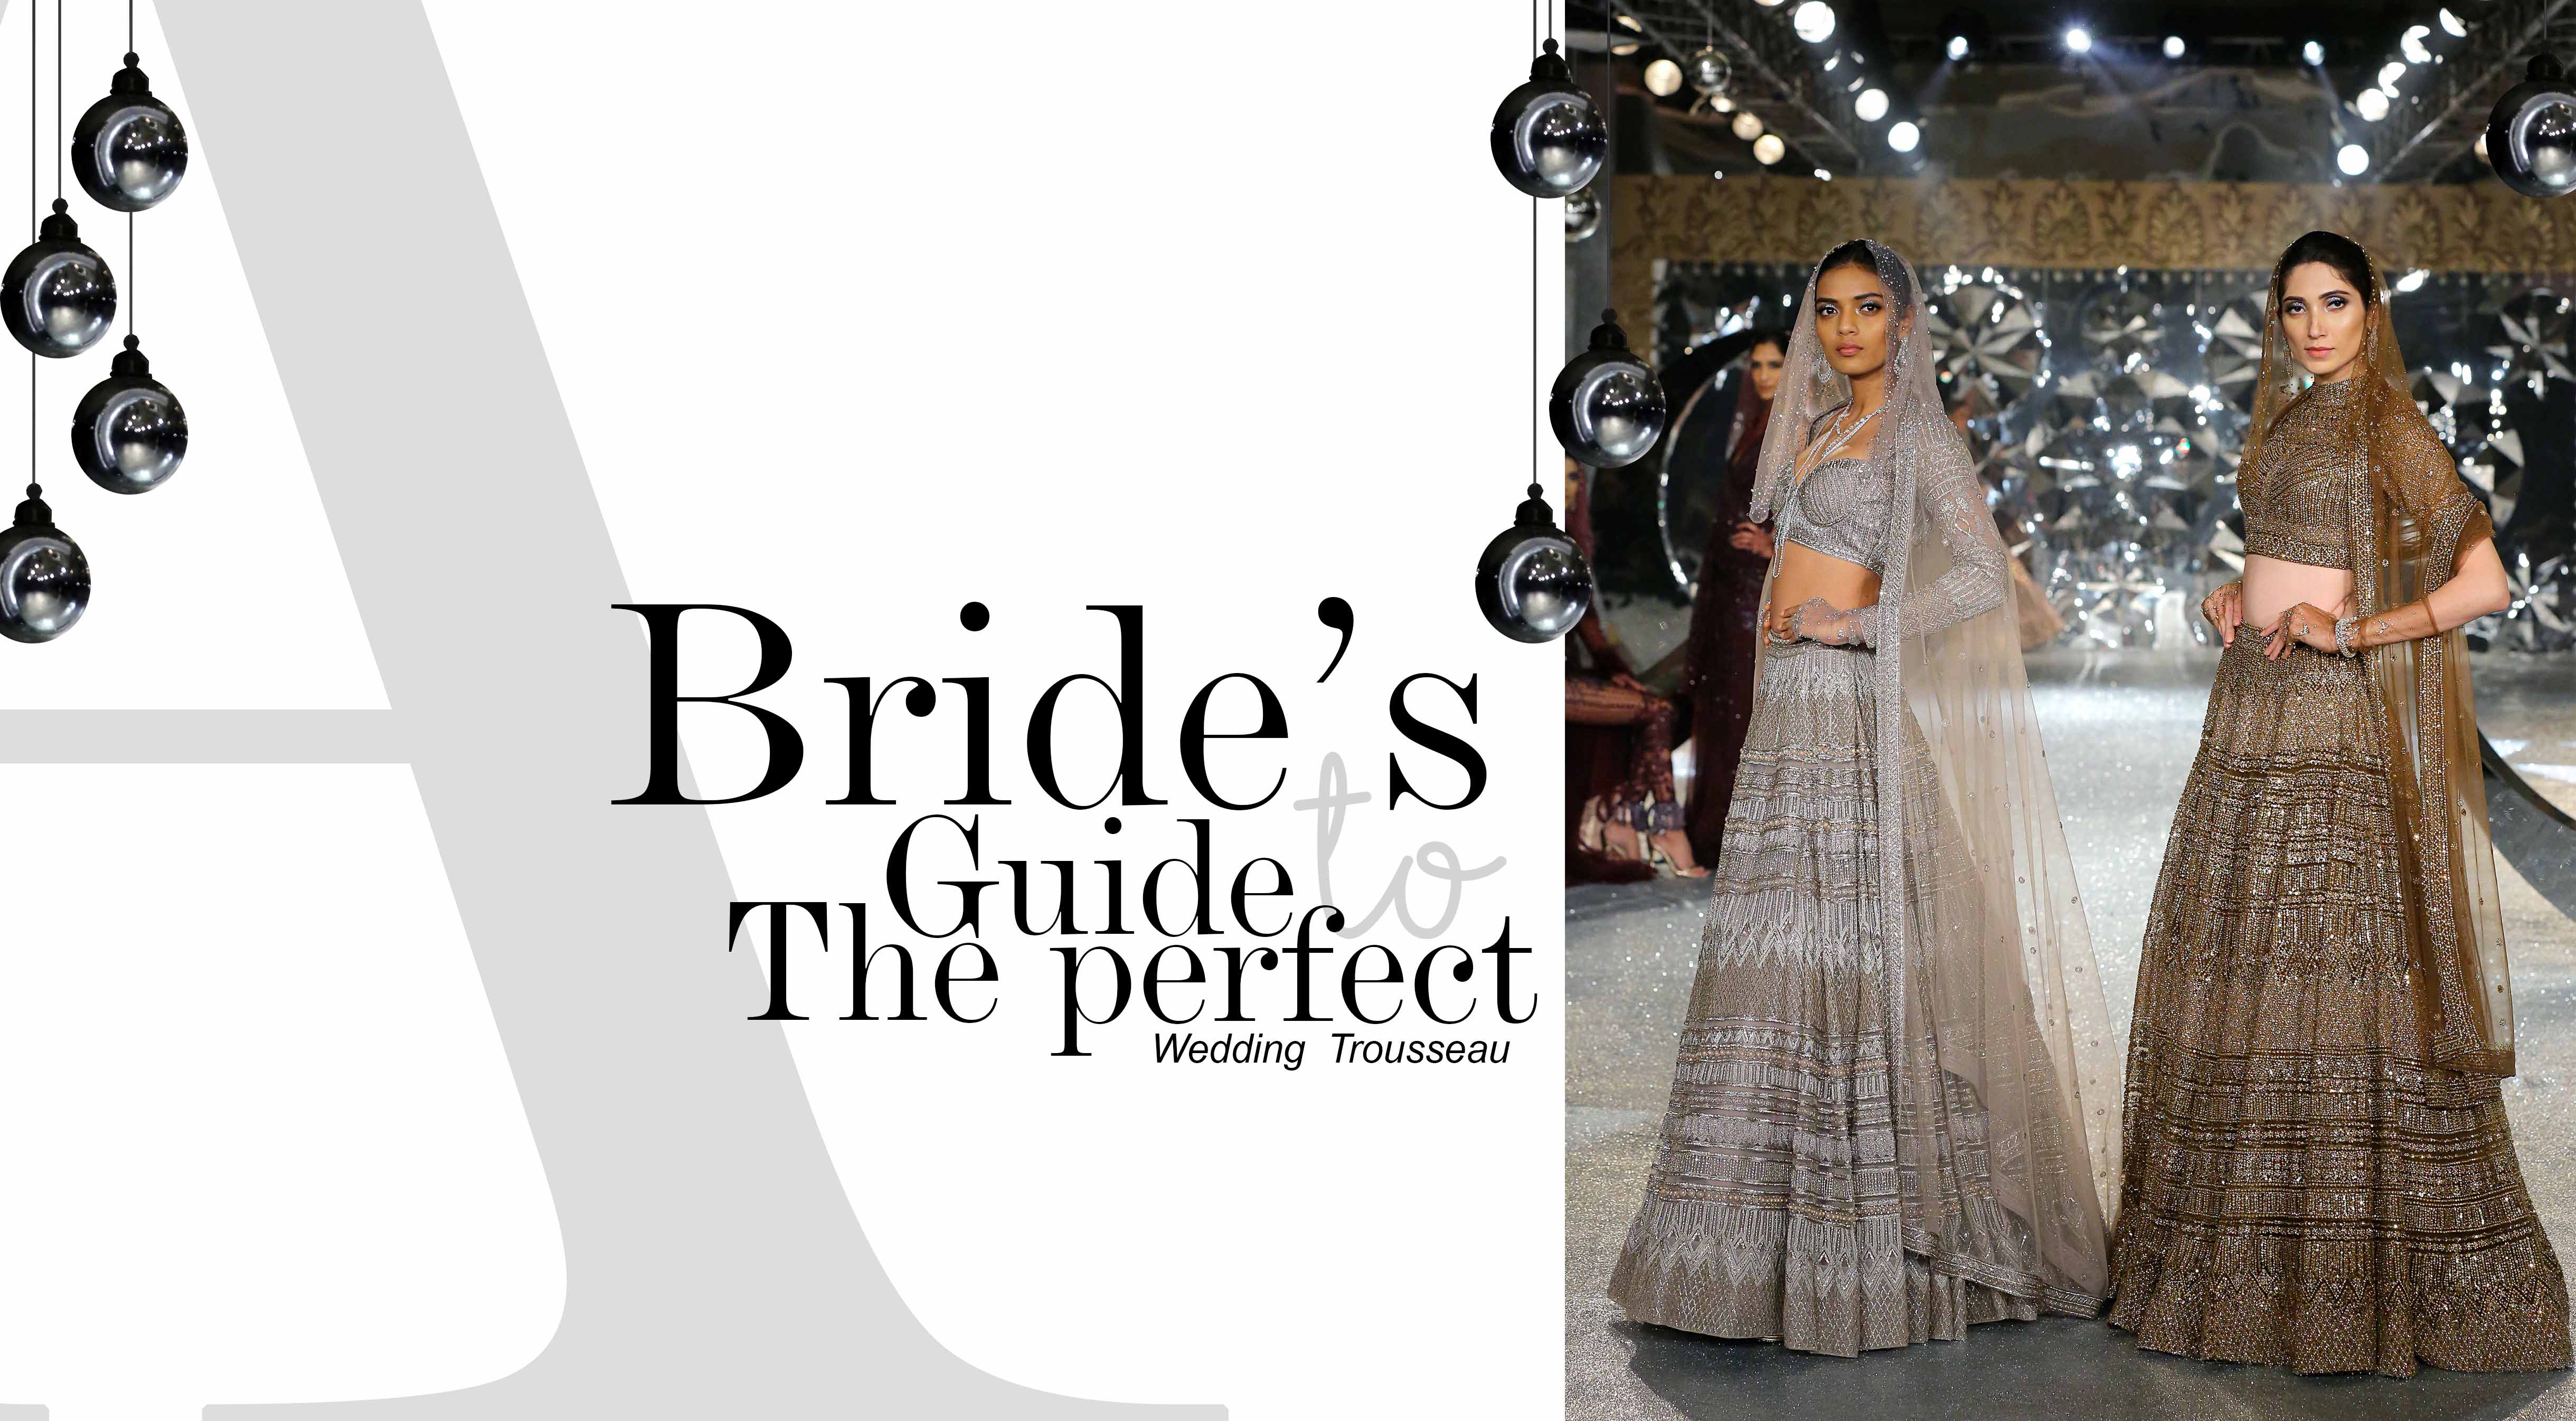 A BRIDE'S GUIDE TO THE PERFECT WEDDING TROUSSEAU